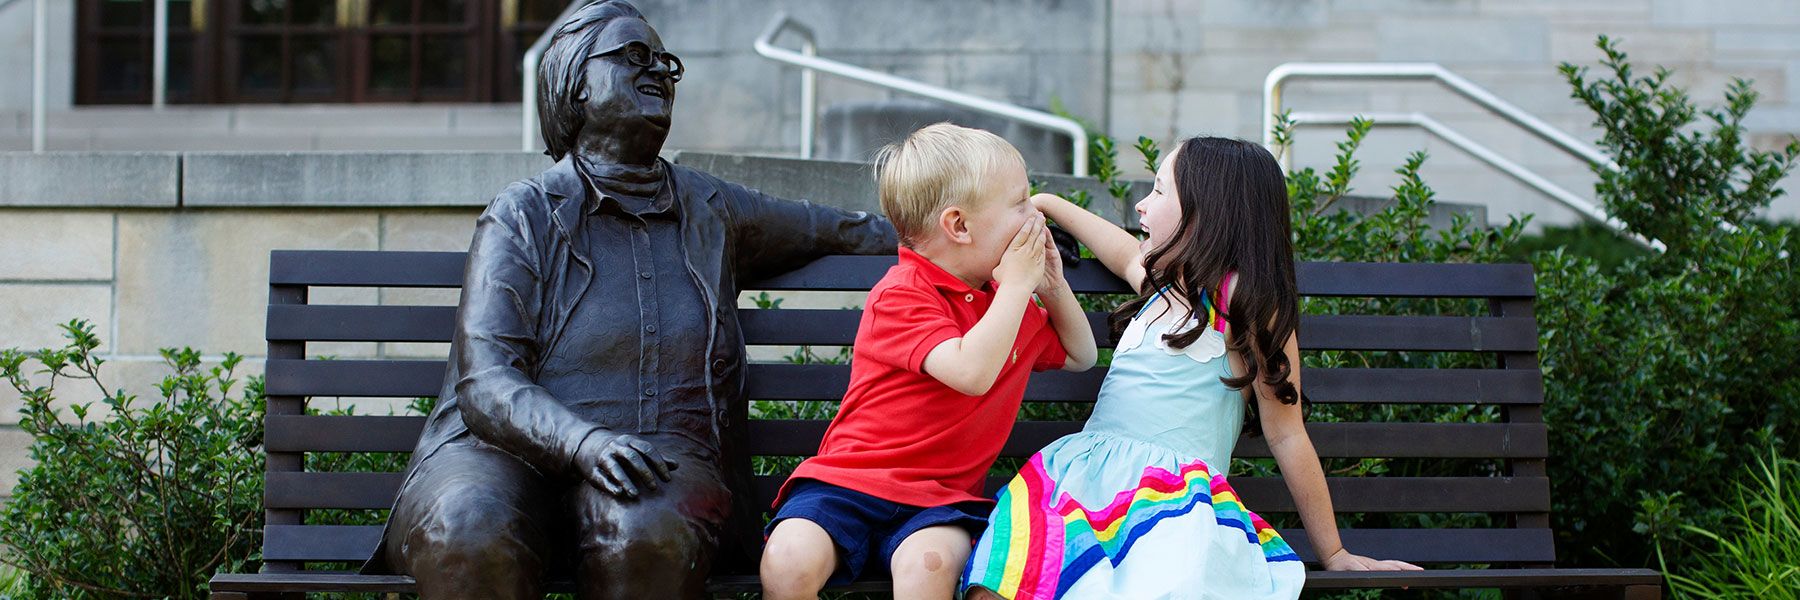 Two children laughing and sitting on a bench with a statue of IU professor Elinor Ostrom.